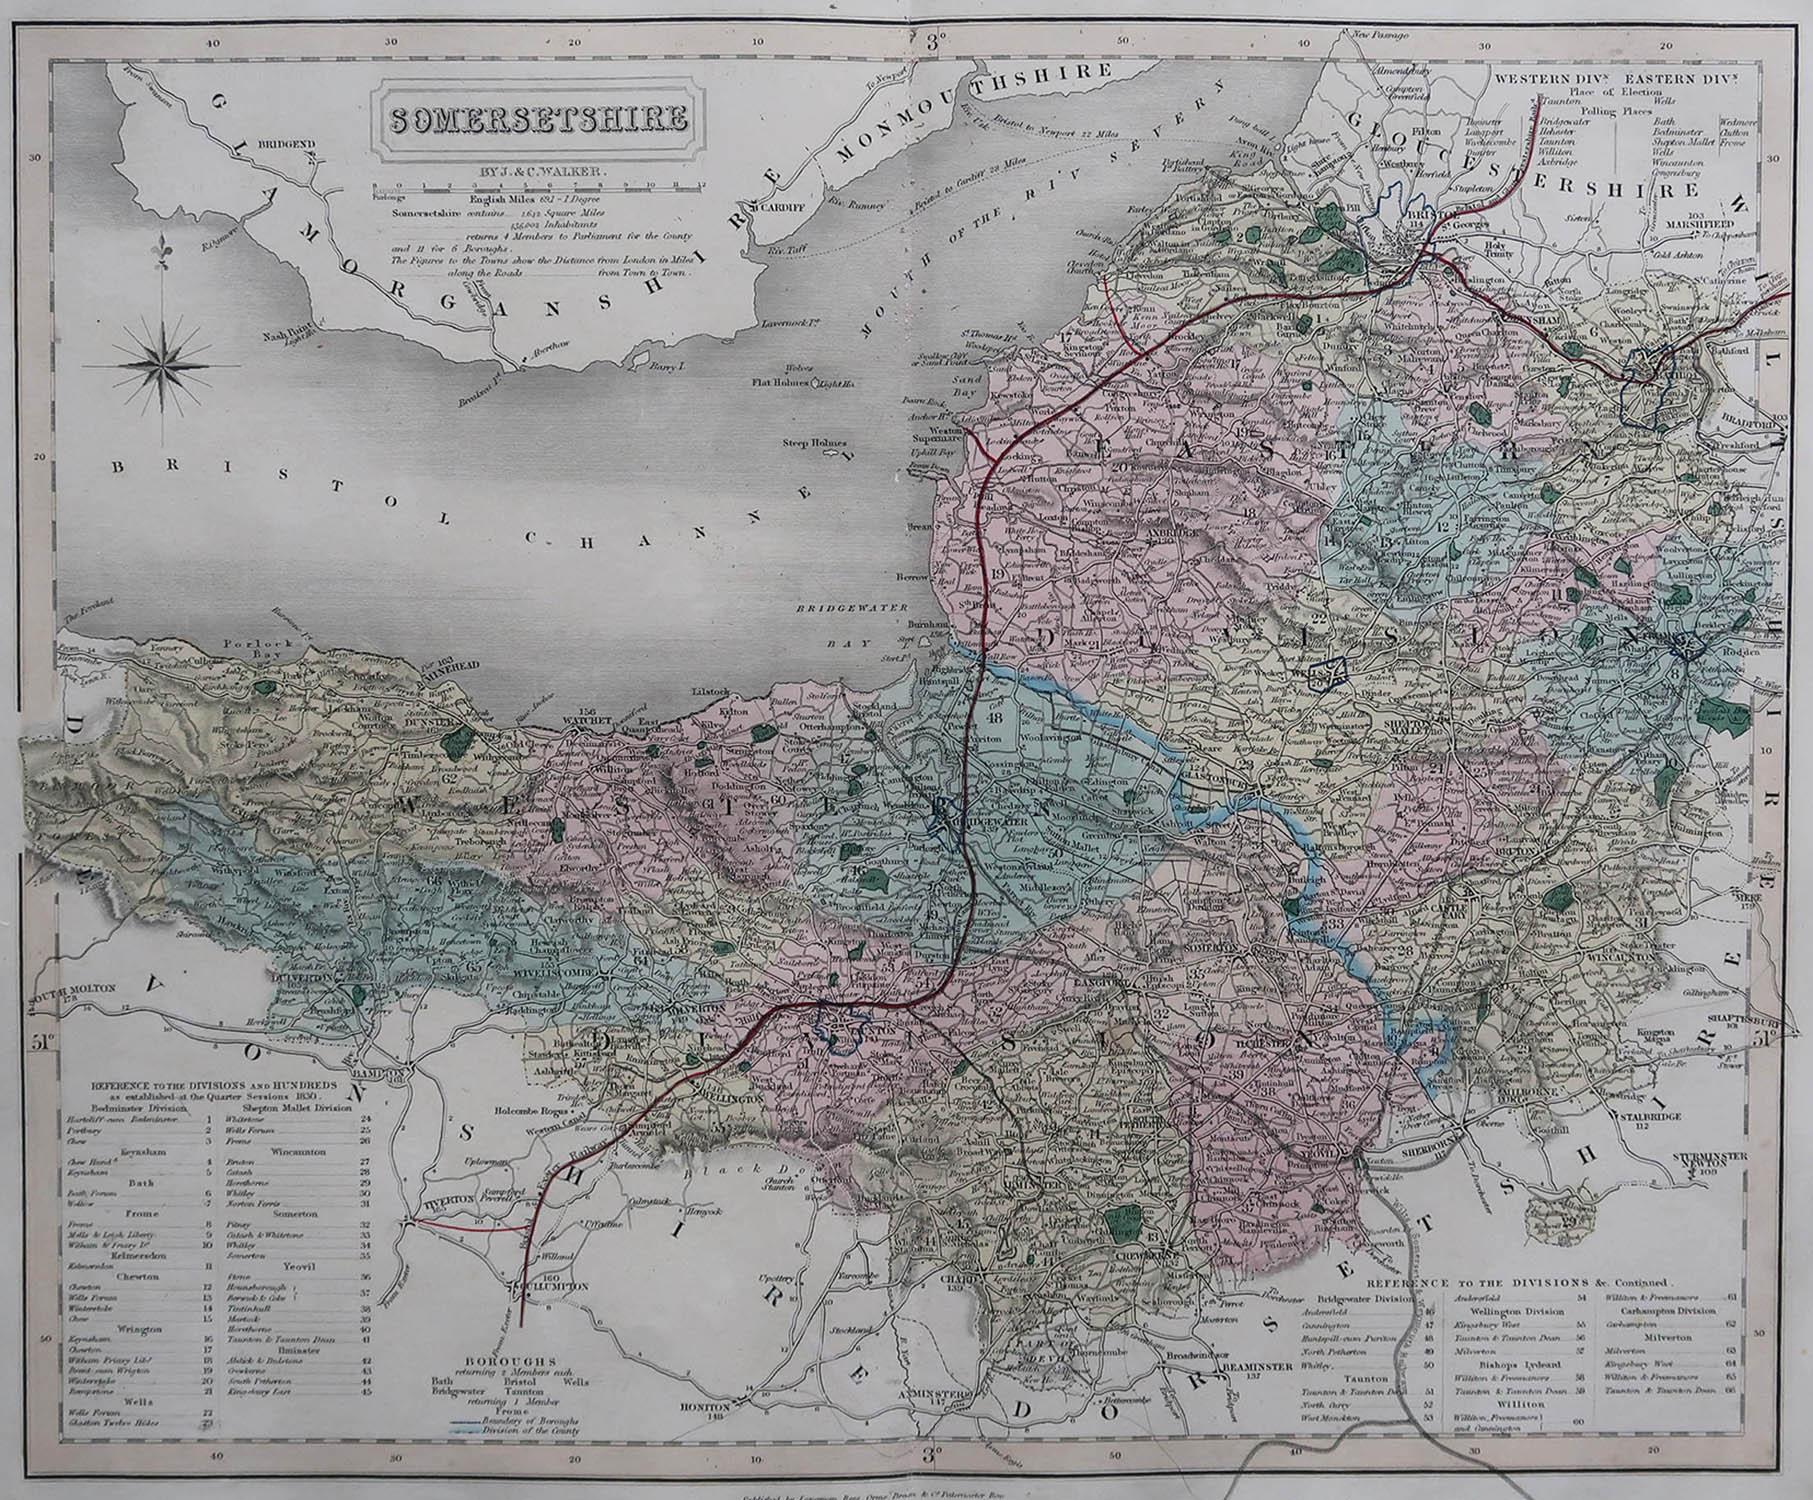 Great map of Somerset

Original colour

By J & C Walker

Published by Longman, Rees, Orme, Brown & Co. 1851

Unframed.




